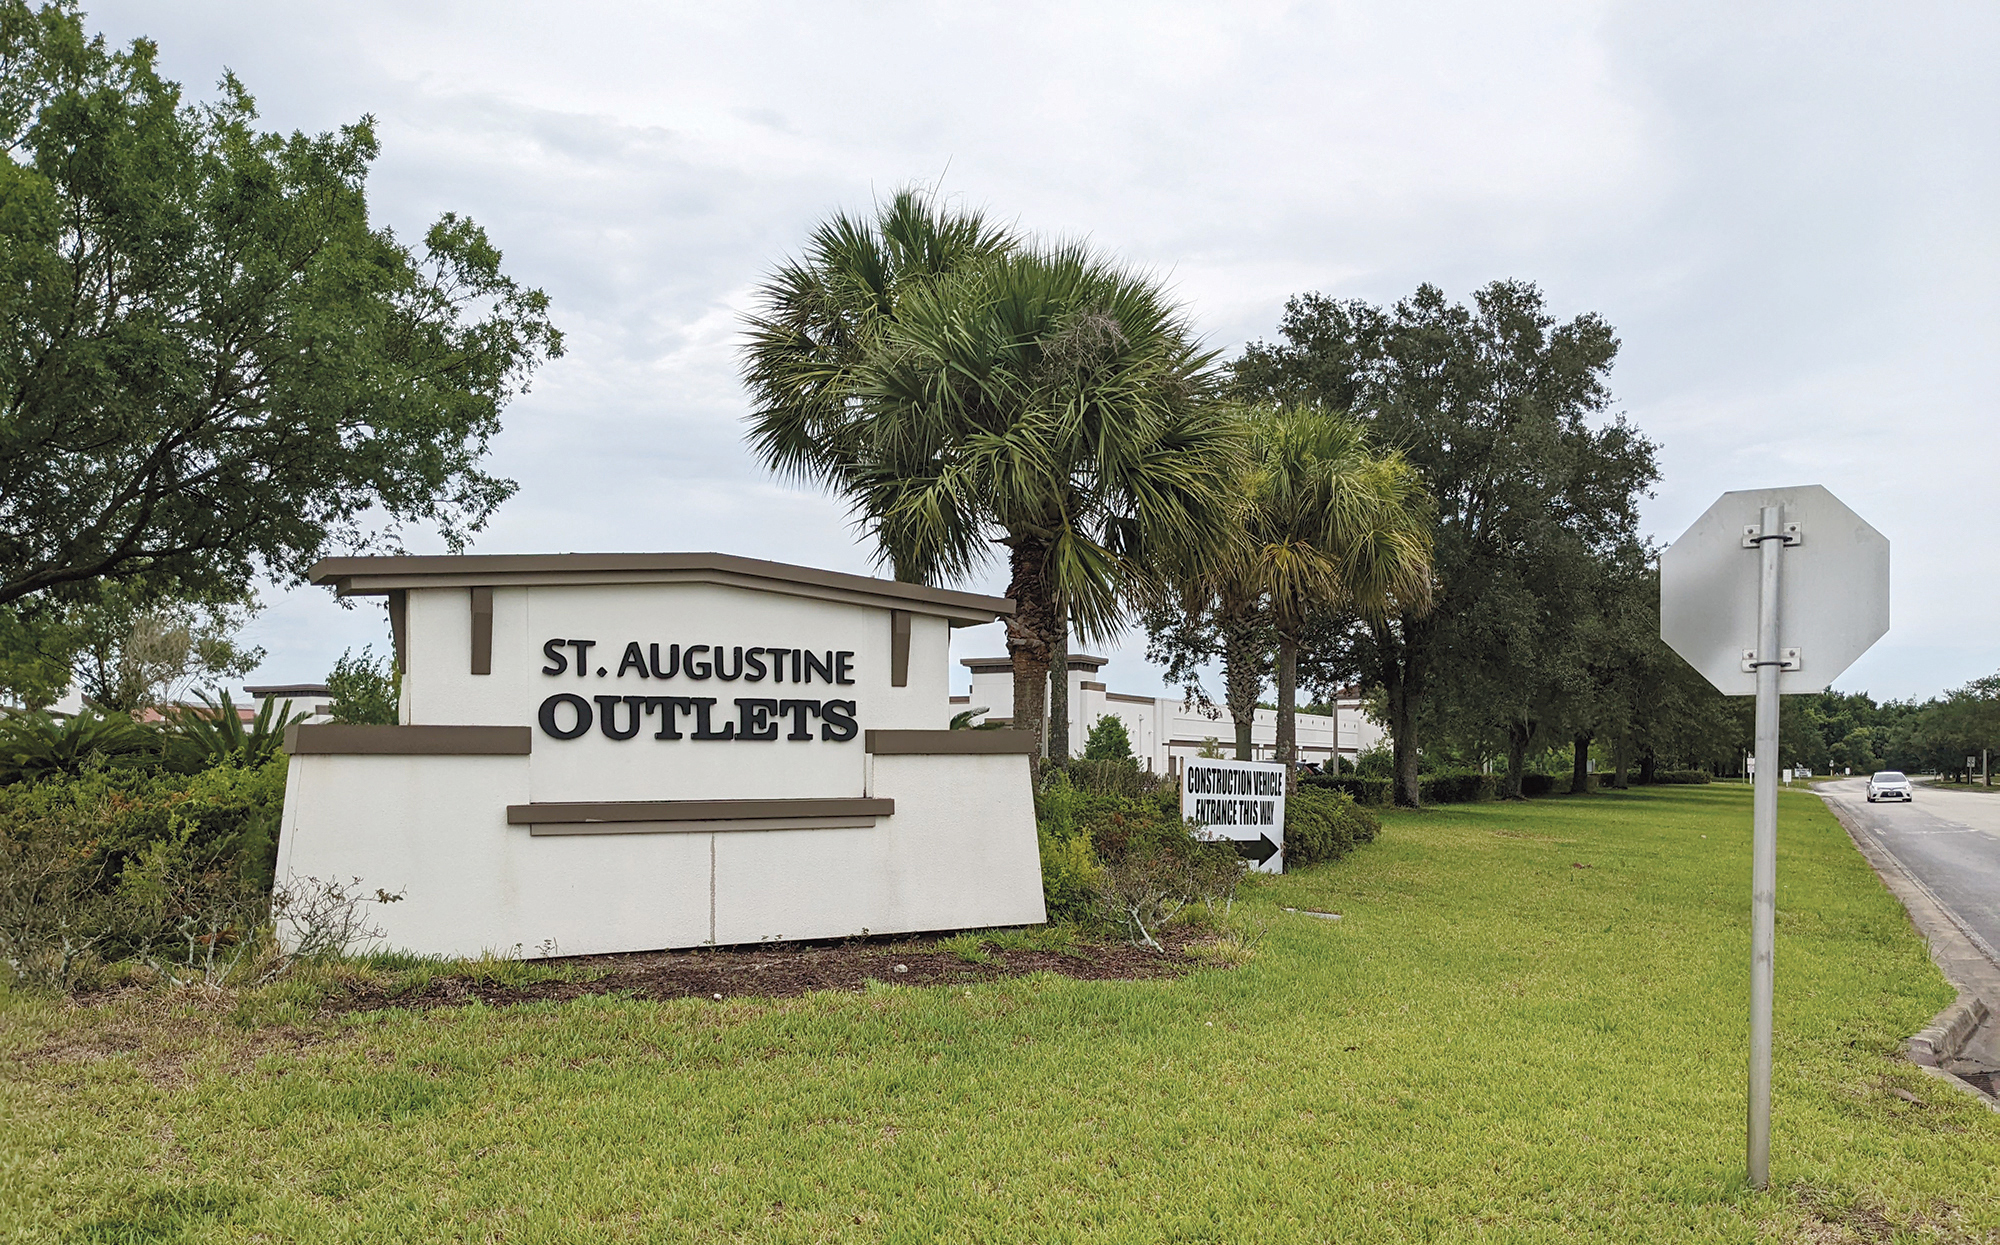 The St. Augustine Outlets is being demolished for apartments.